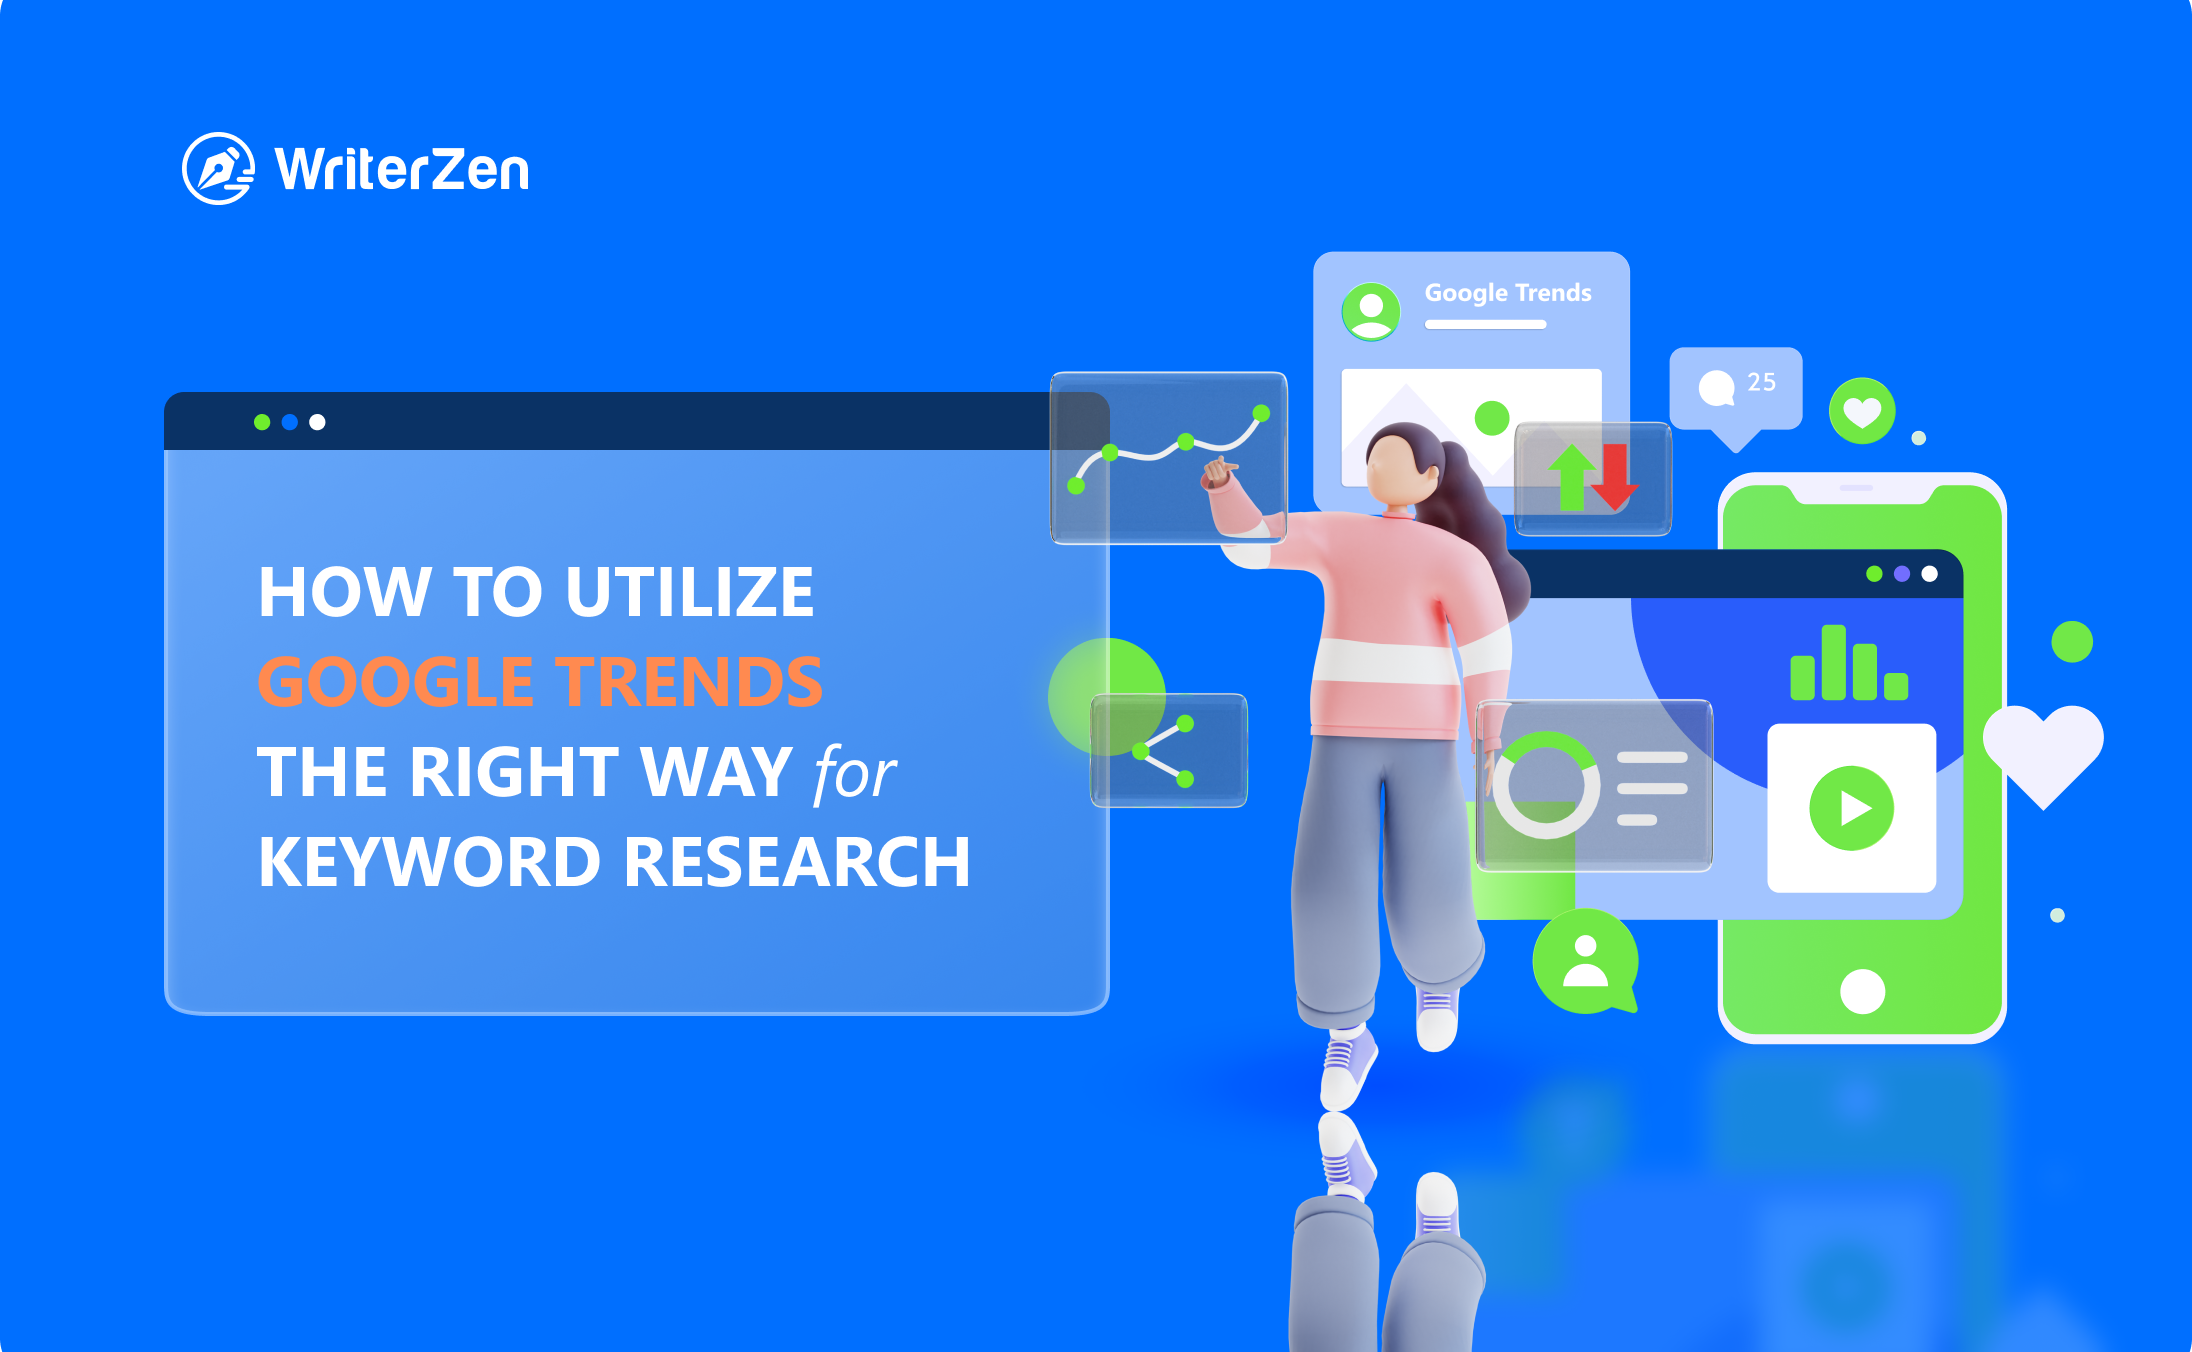 How to Utilize Google Trends the Right Way for Keyword Research